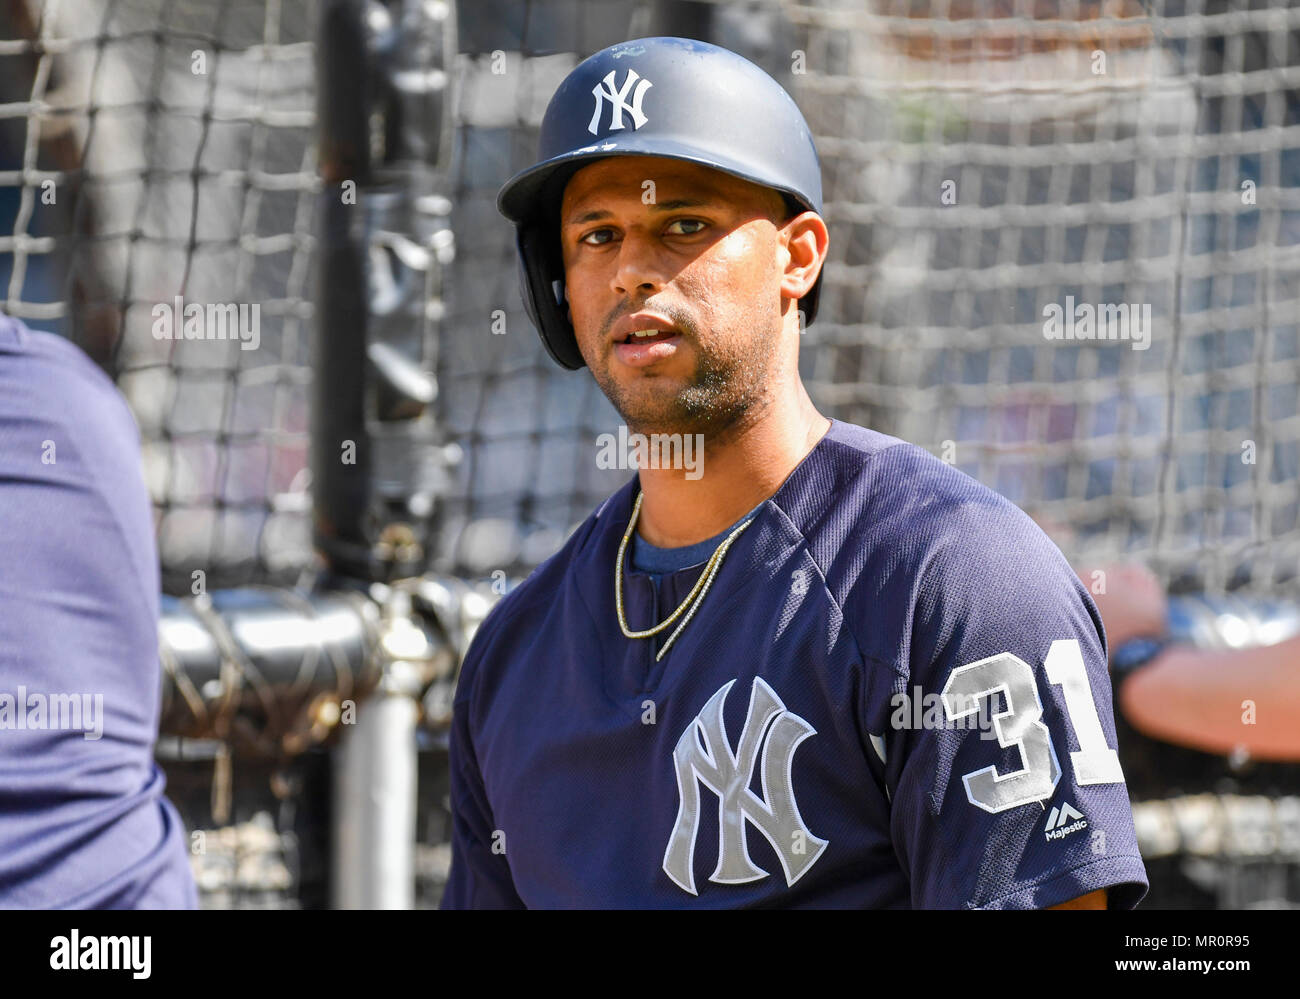 May 23, 2018: New York Yankees center fielder Aaron Hicks #31 during an MLB  game between the New York Yankees and the Texas Rangers at Globe Life Park  in Arlington, TX Texas